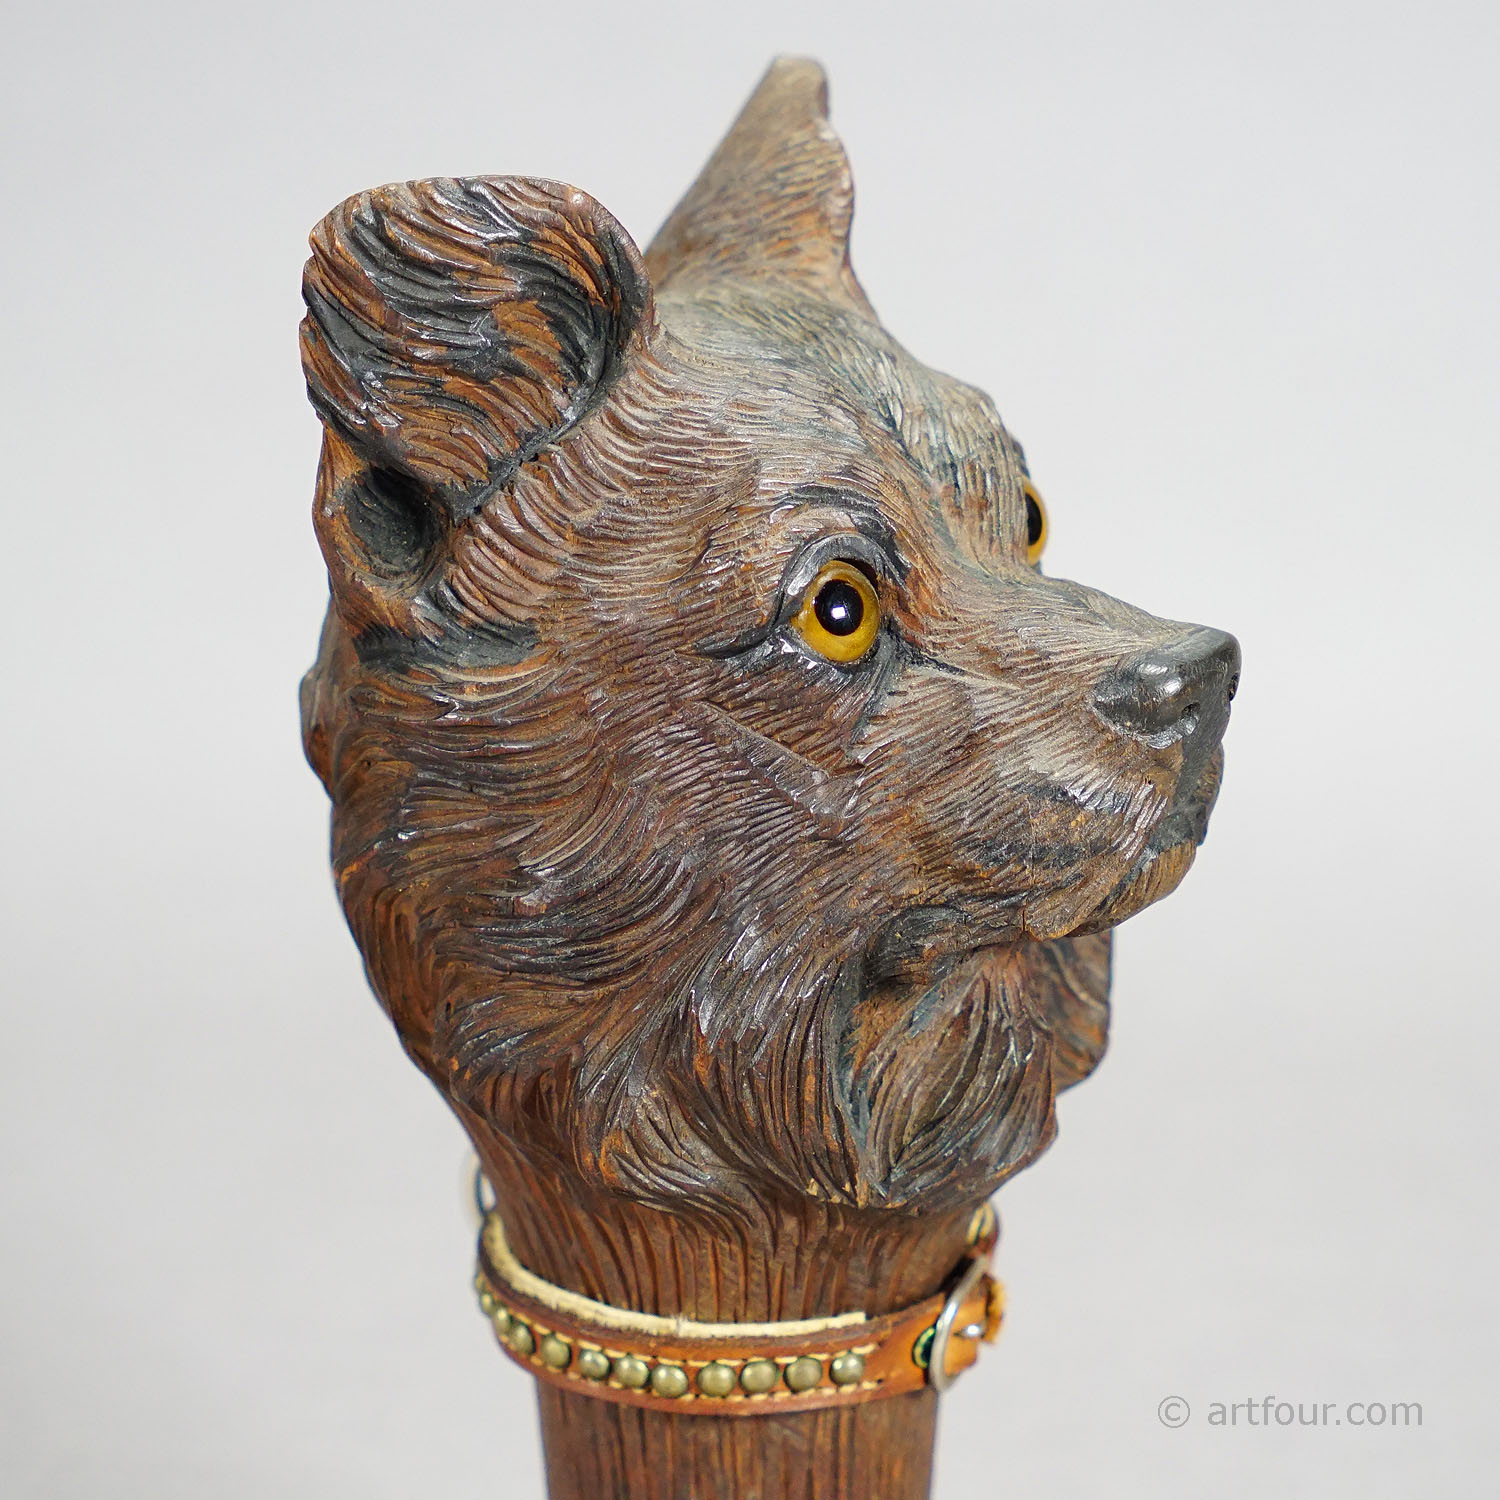 Antique Wooden Carved Head of a Norwich Terrier, Brienz ca. 1900